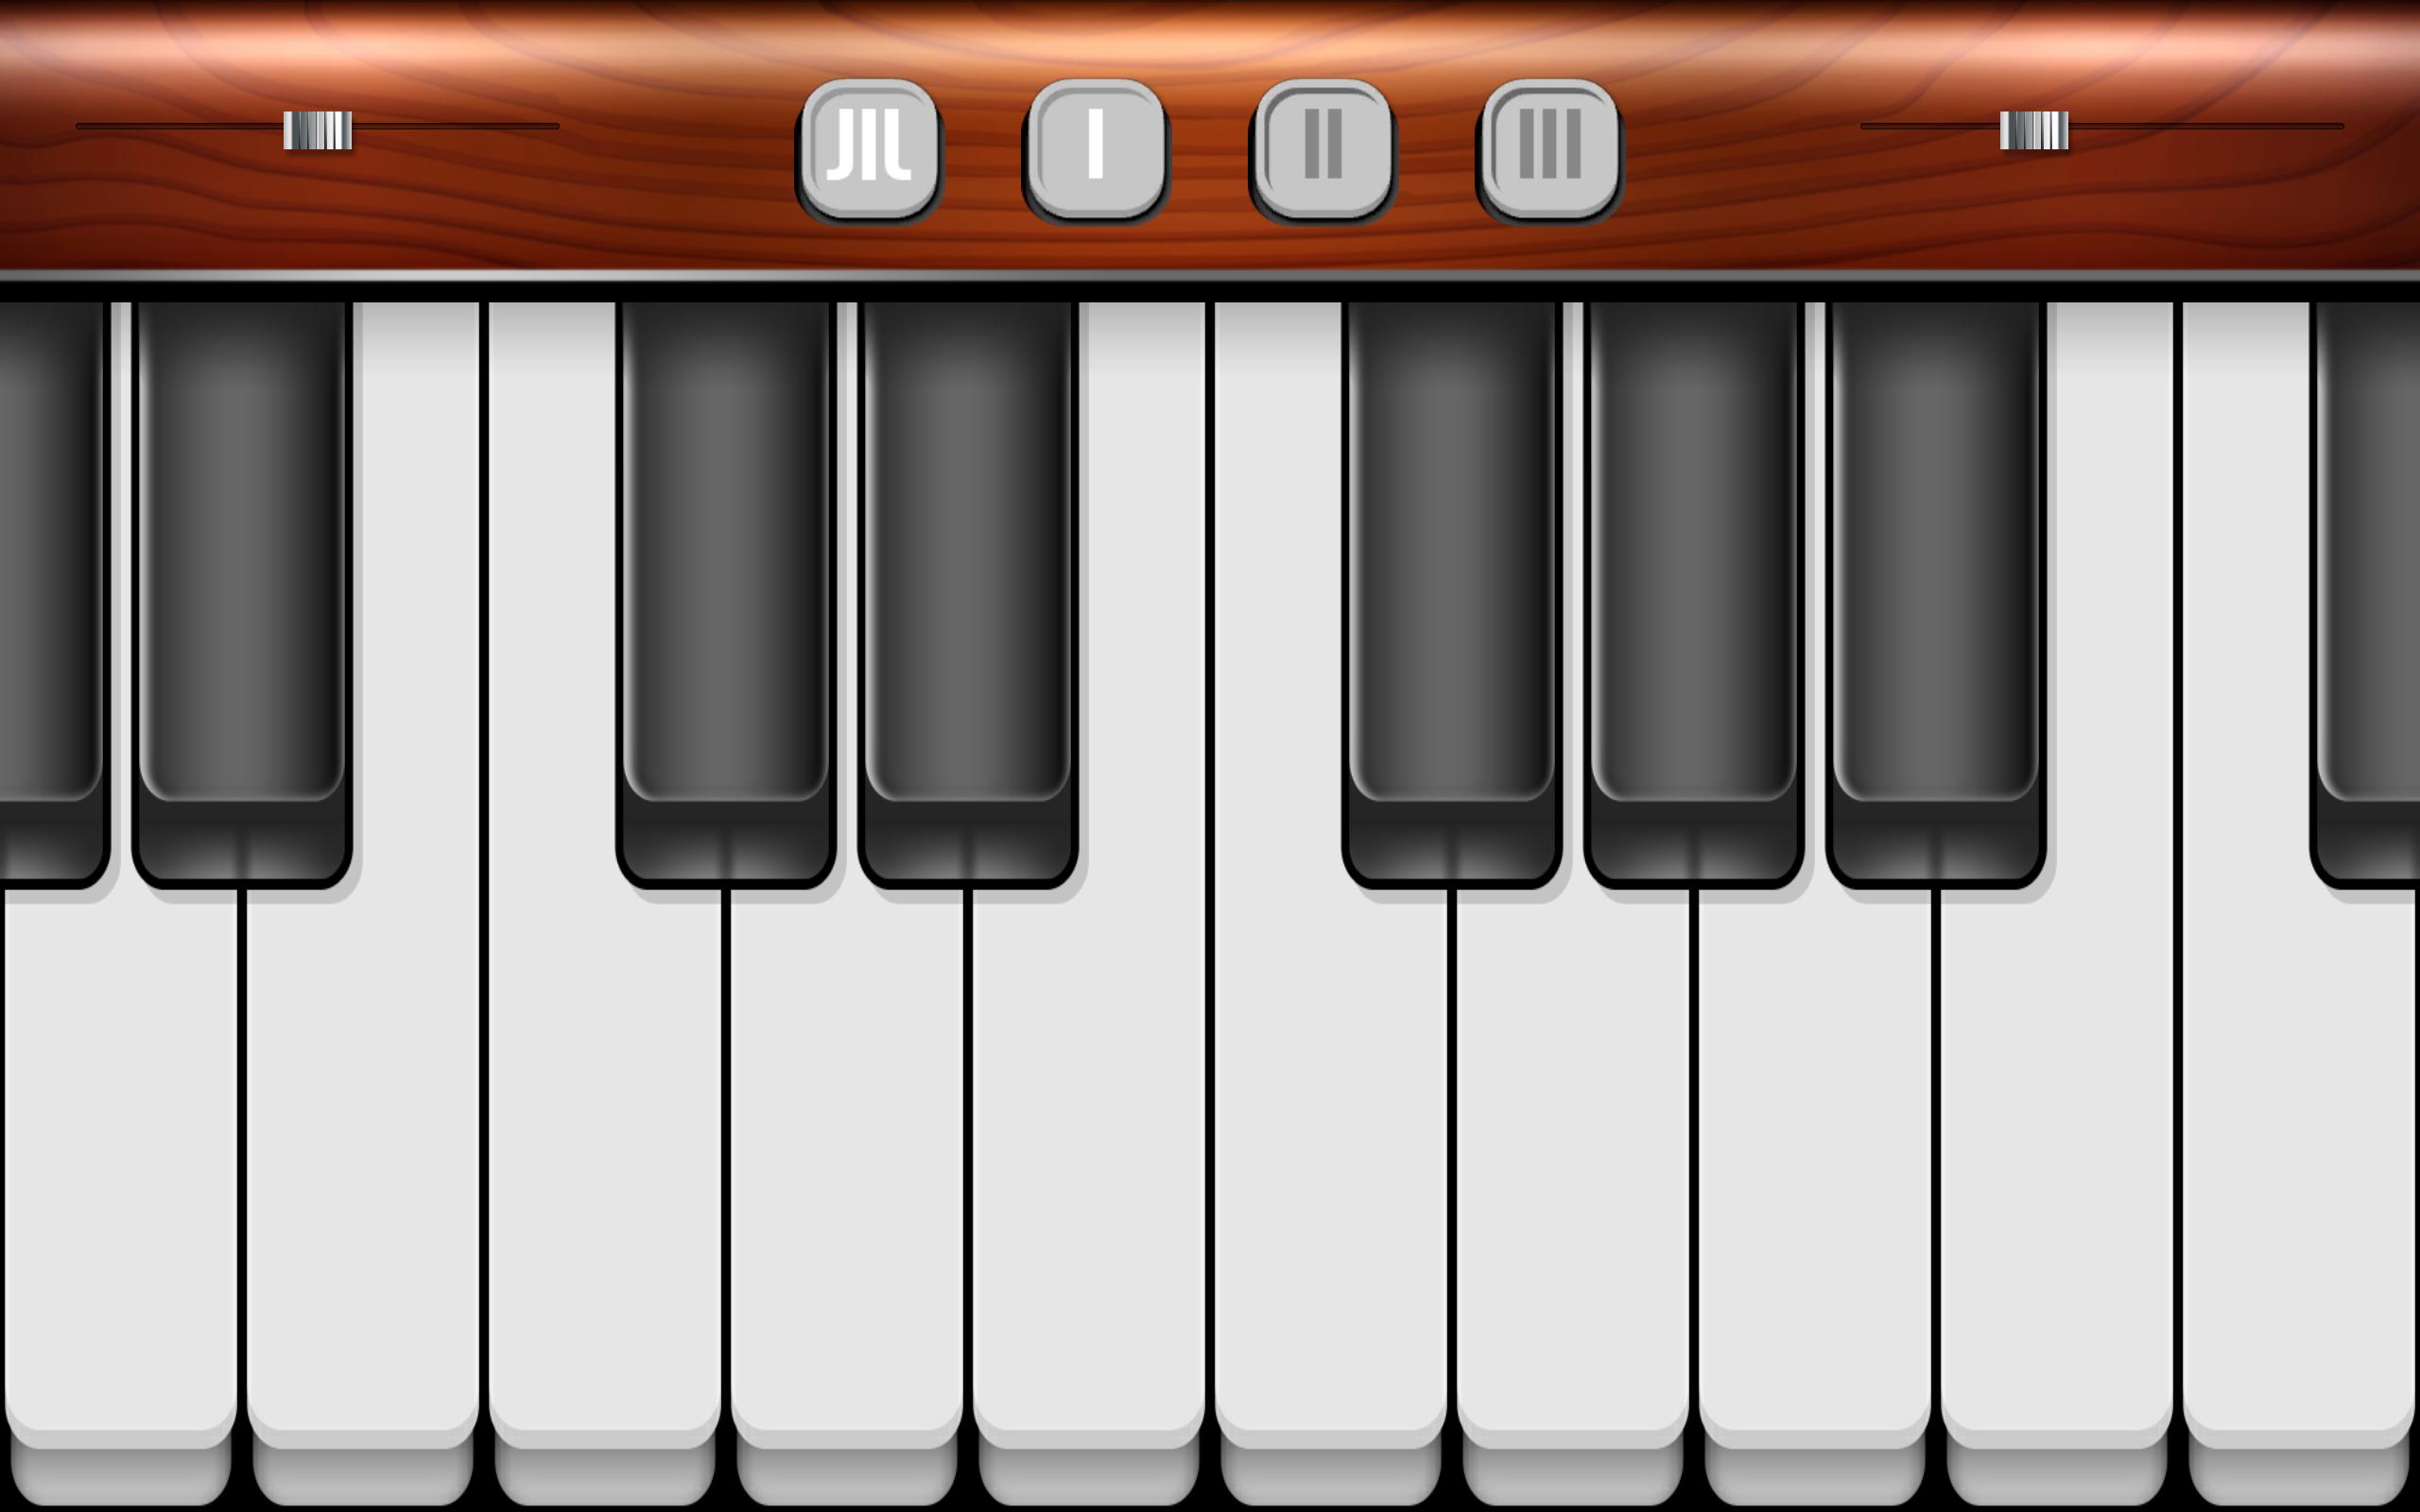 Piano Virtual for Android - APK Download